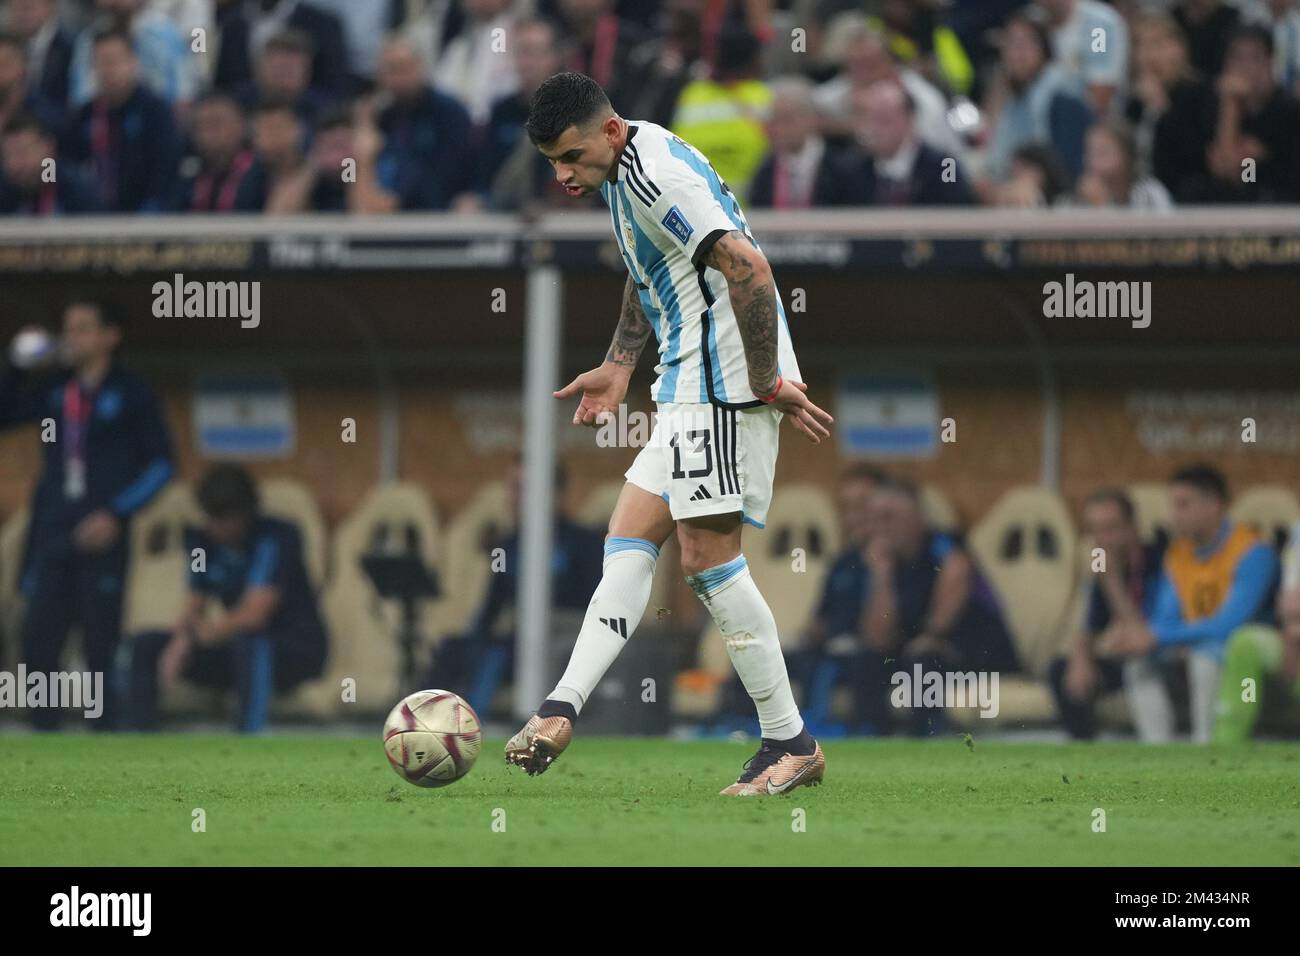 LUSAIL, QATAR - DECEMBER 18: Player of Argentina Cristian Romero controls the ball during the FIFA World Cup Qatar 2022 Final match between Argentina and France at Lusail Stadium on December 18, 2022 in Lusail, Qatar. (Photo by Florencia Tan Jun/PxImages) Stock Photo